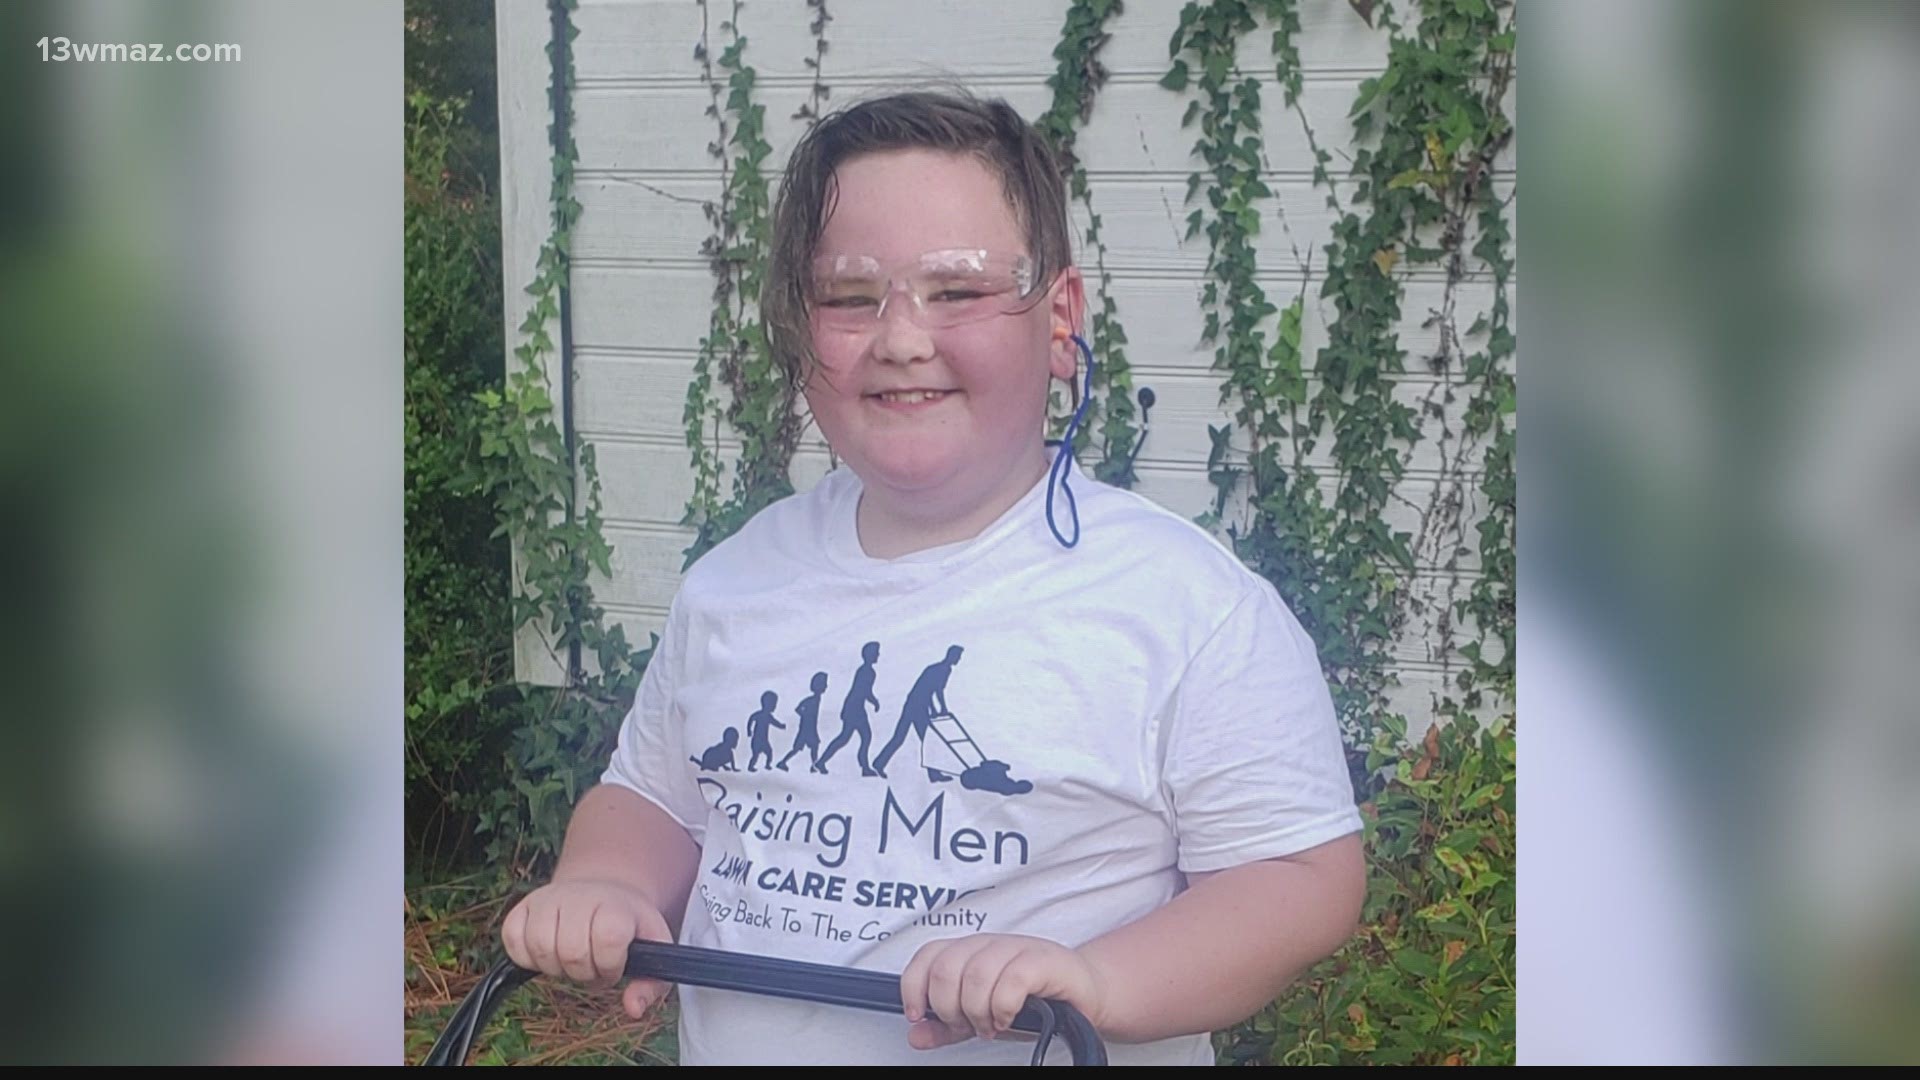 Jesse Ward, 9, has spent the last two weeks mowing lawns for members of his community